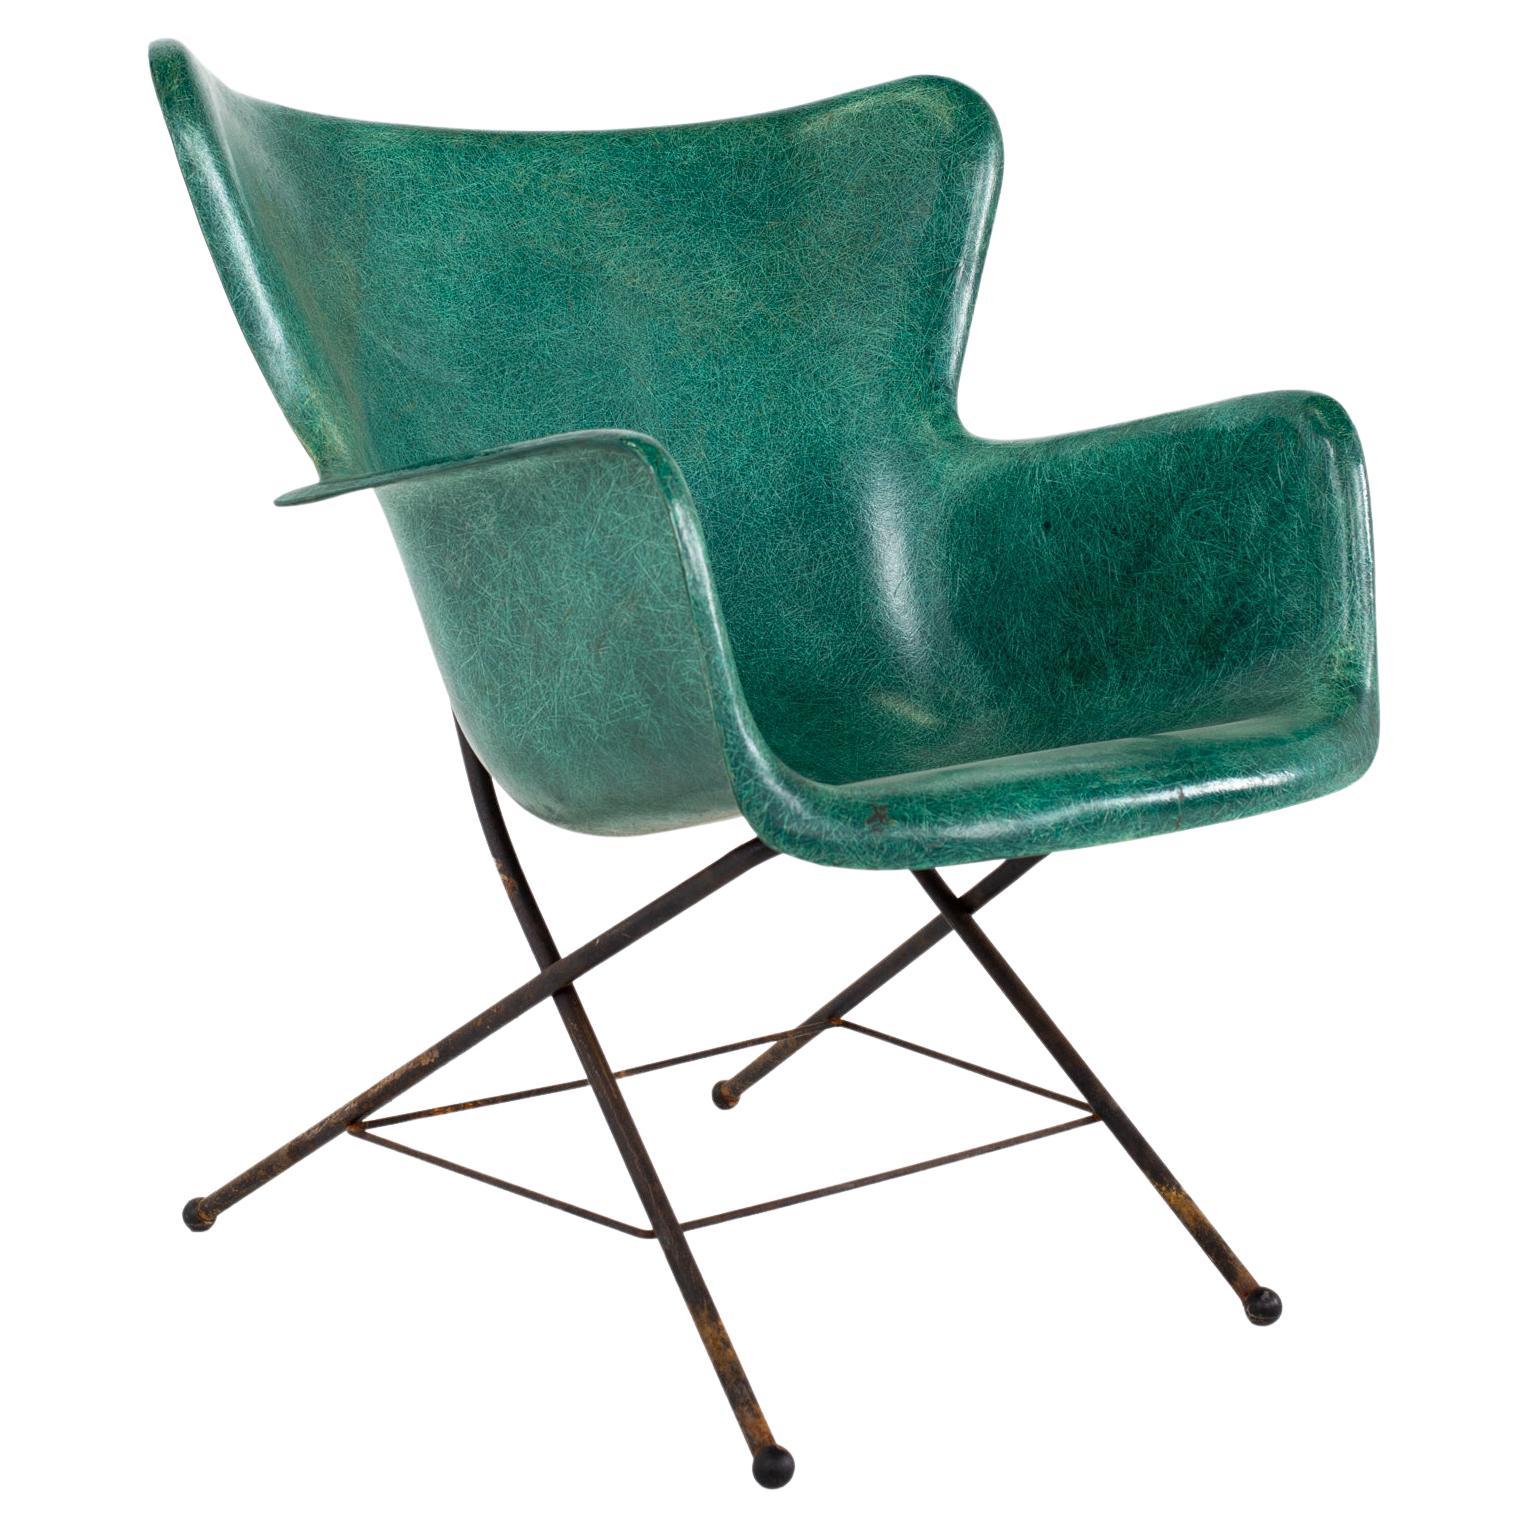 Lawrence Peabody for Selig Mid Century Wingback Fiberglass Shell Chair, Green